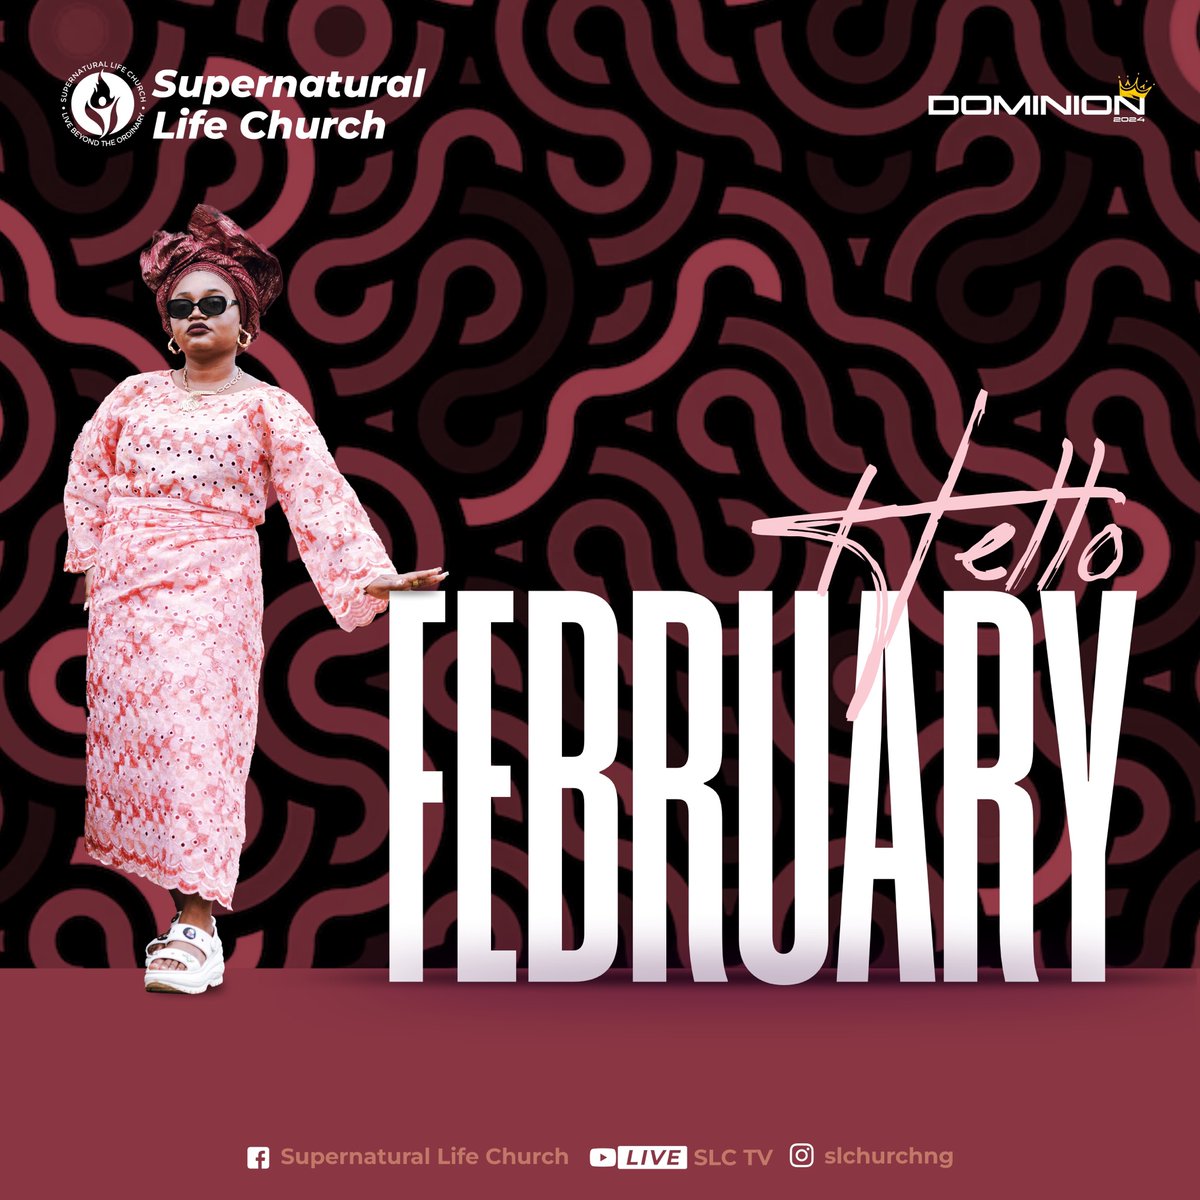 God is faithful and we are grateful!
Welcome to our month of Spiritual growth and maturity 
Happy new month

#happynewmonth
#ouryearofdominion
#theslcexperience 
#slcfamilyworldwide